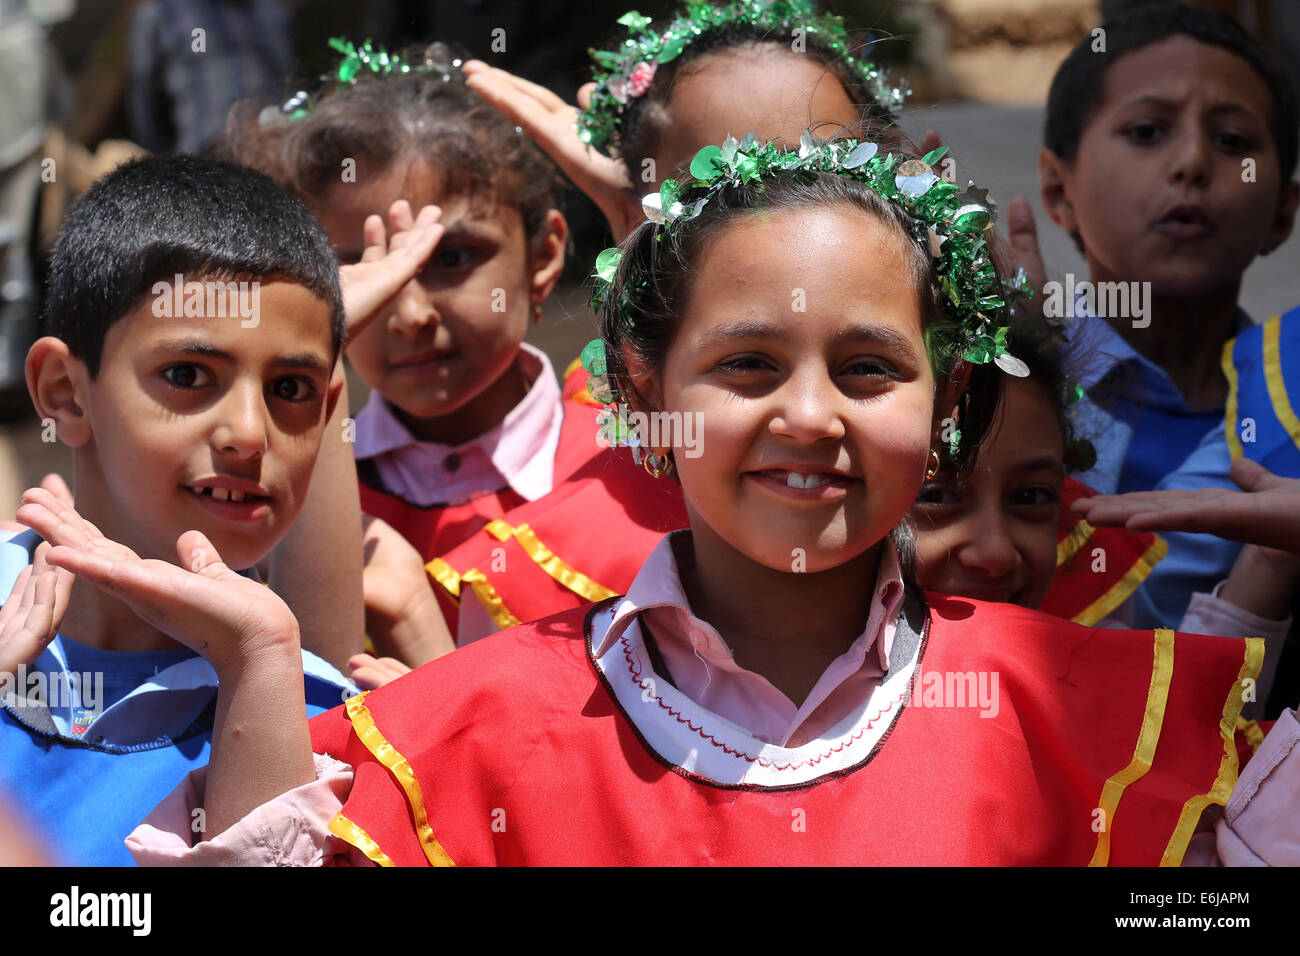 Boys and girls of a Secondary School perform traditional dances. Assiut, Egypt Stock Photo